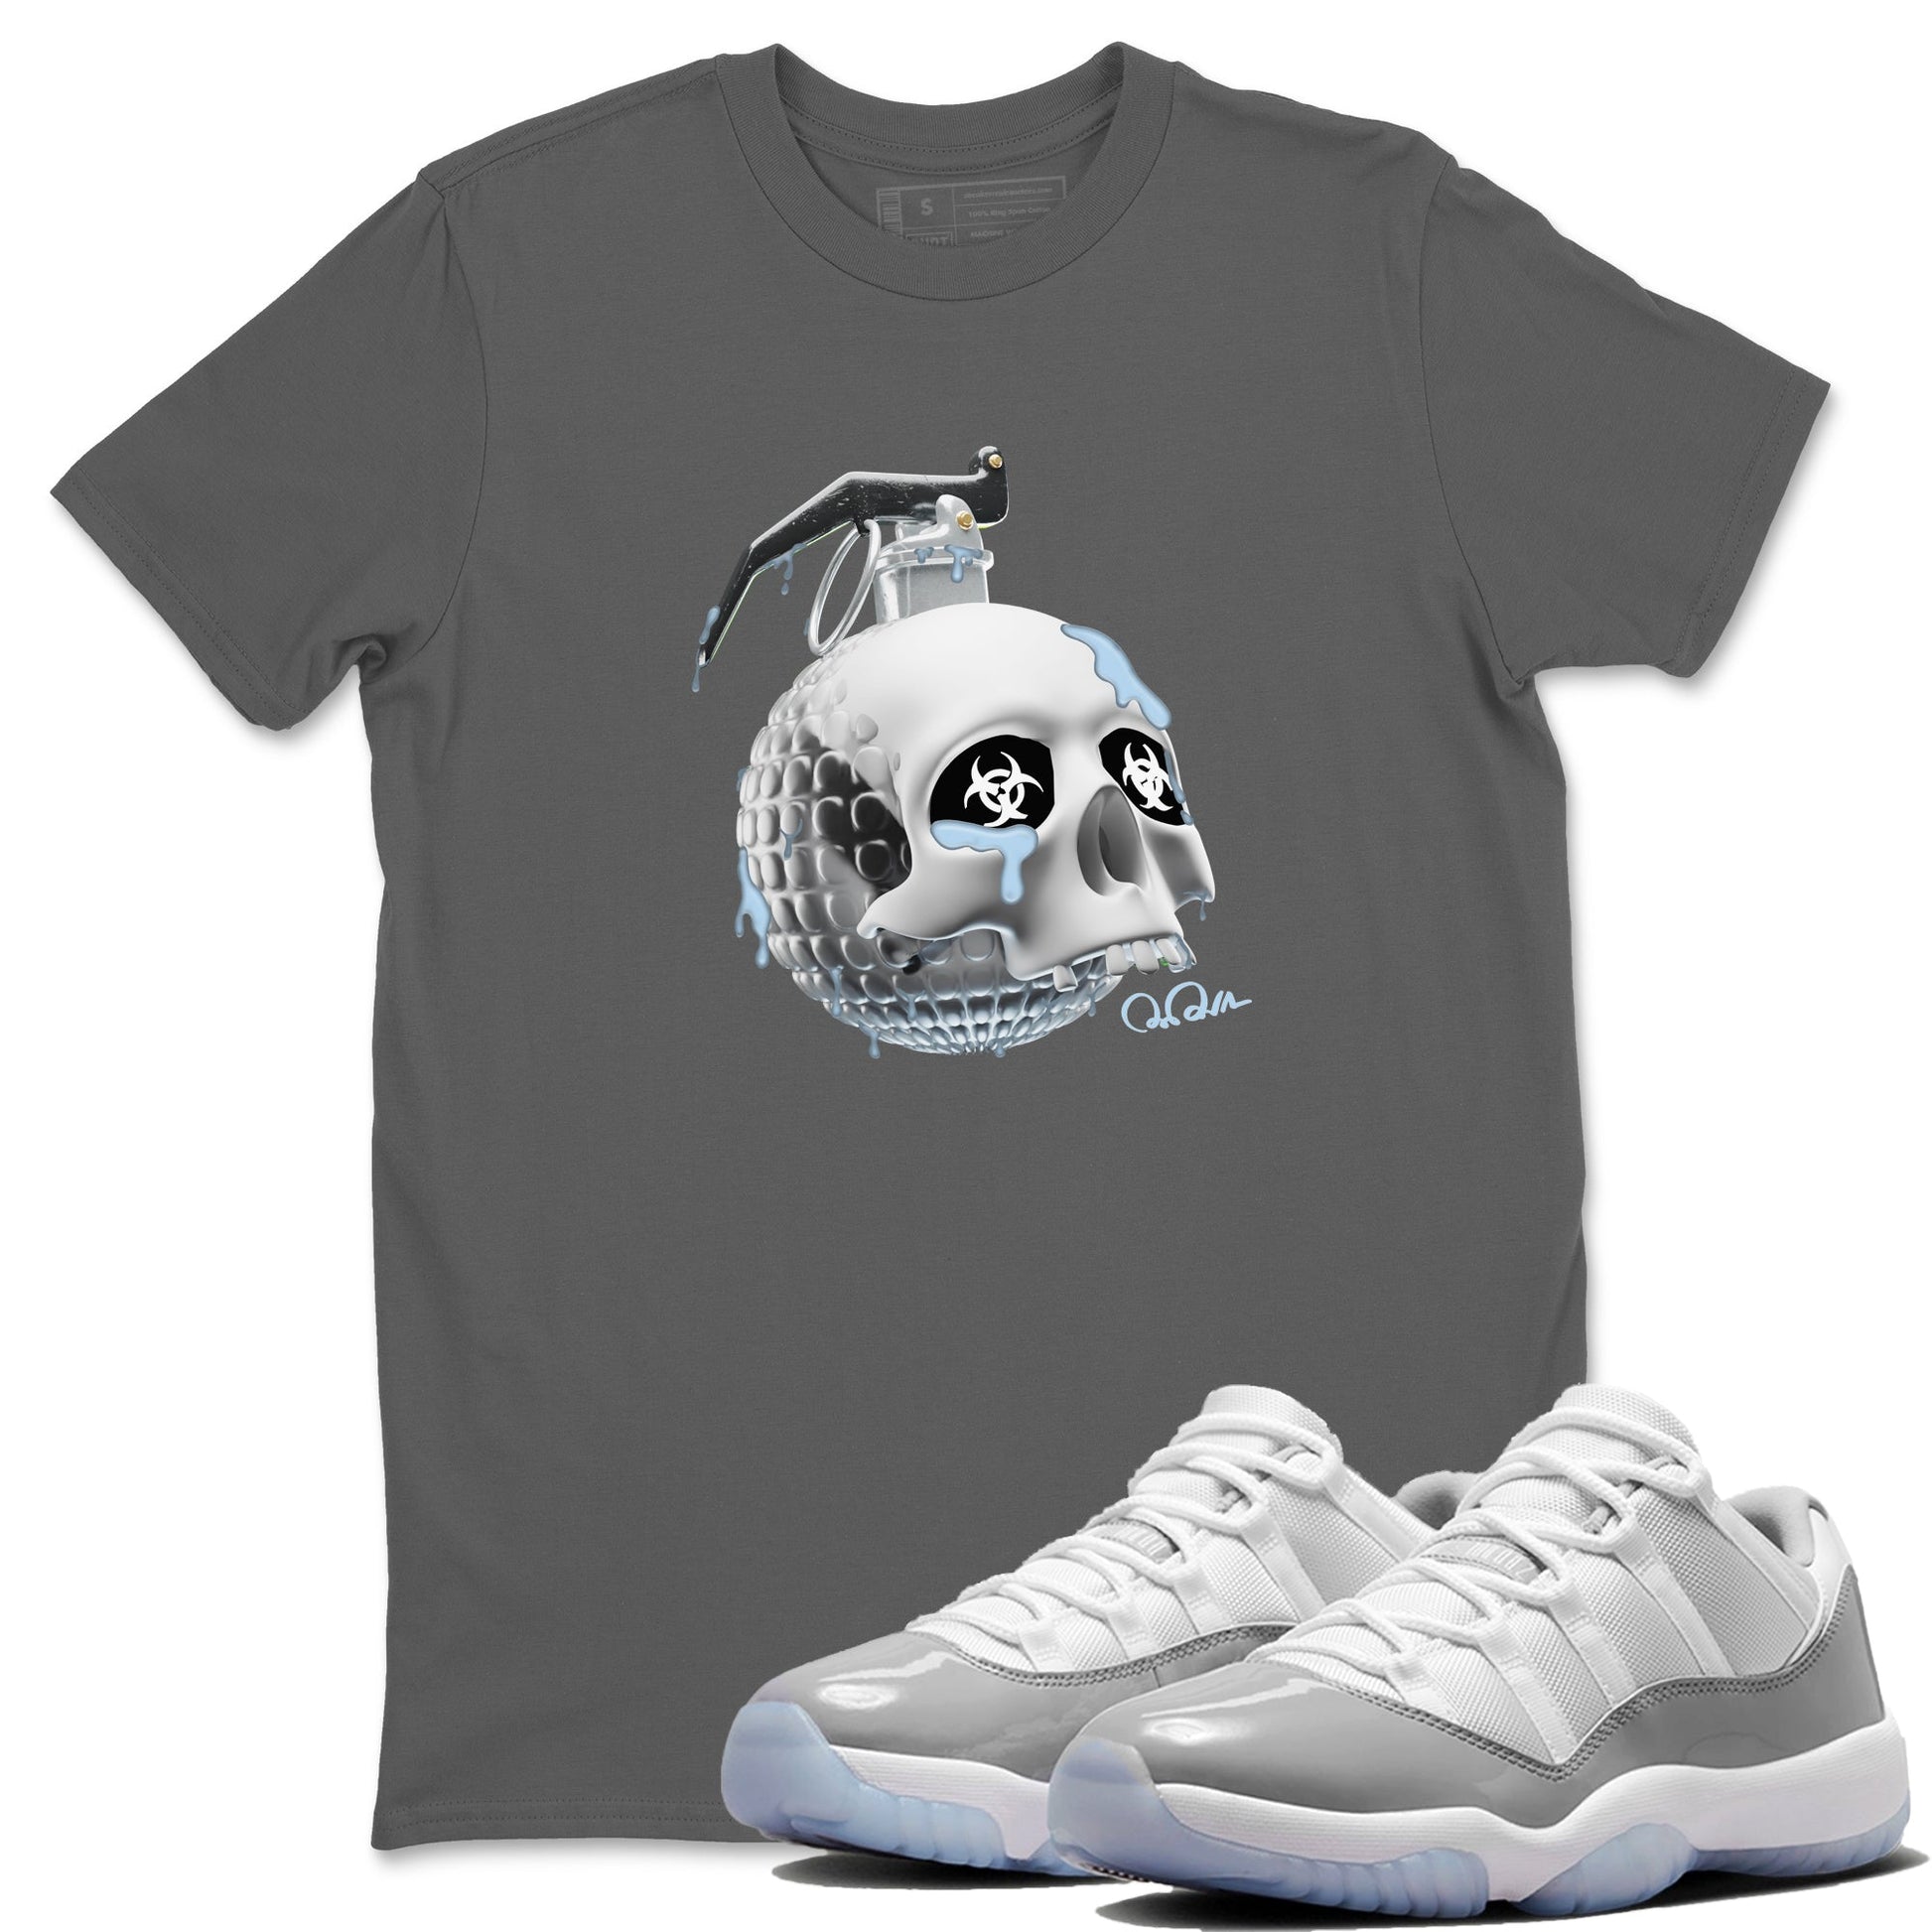 Air Jordan 11 White Cement Skull Bomb Crew Neck Sneaker Tees Air Jordan 11 Cement Grey Sneaker T-Shirts Washing and Care Tip